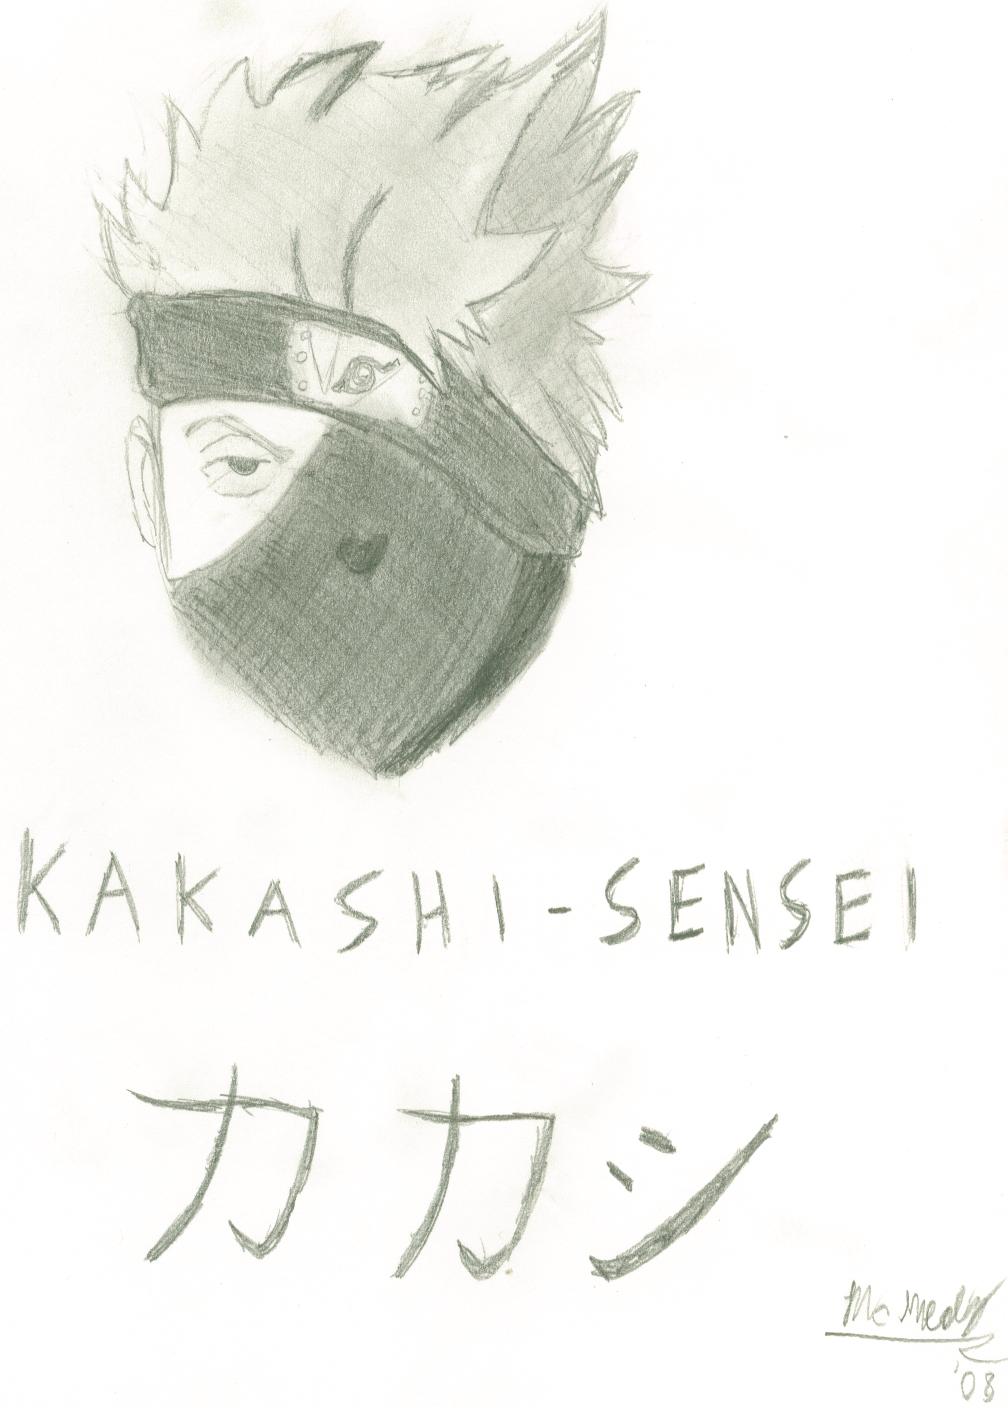 First Try of Kakashi-Sensei by McNealy